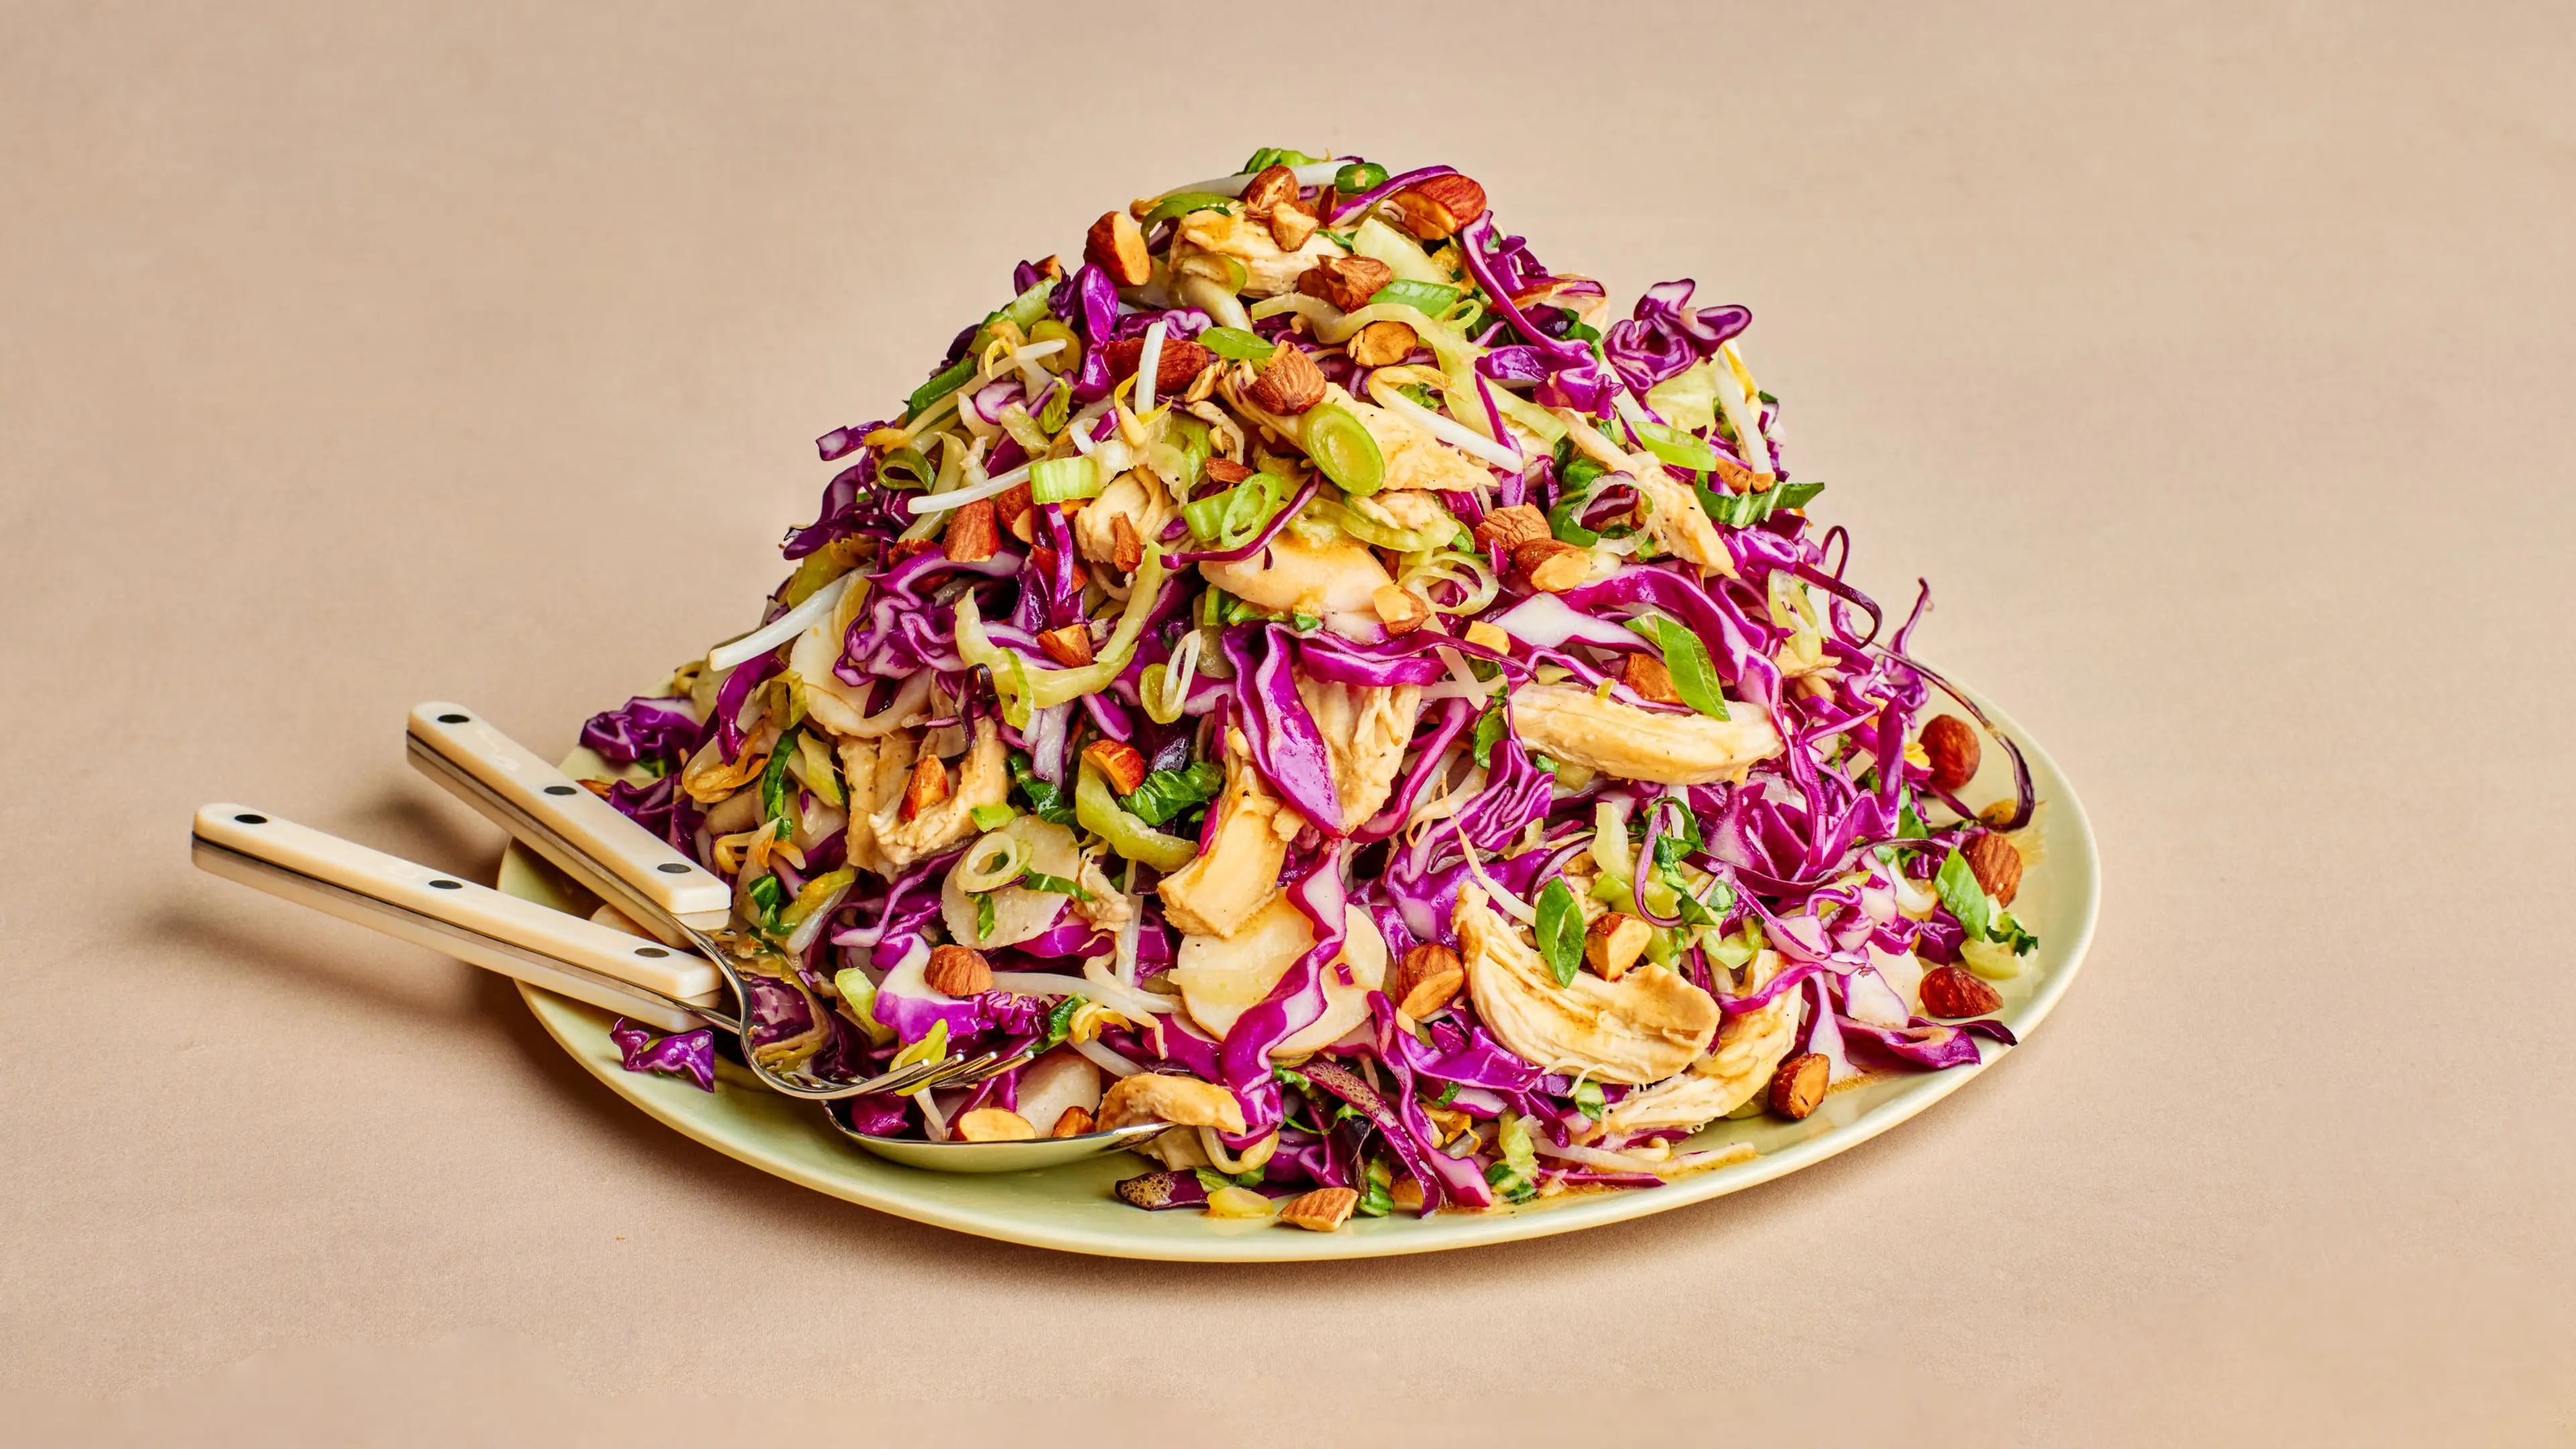 Chicken and Cabbage Salad